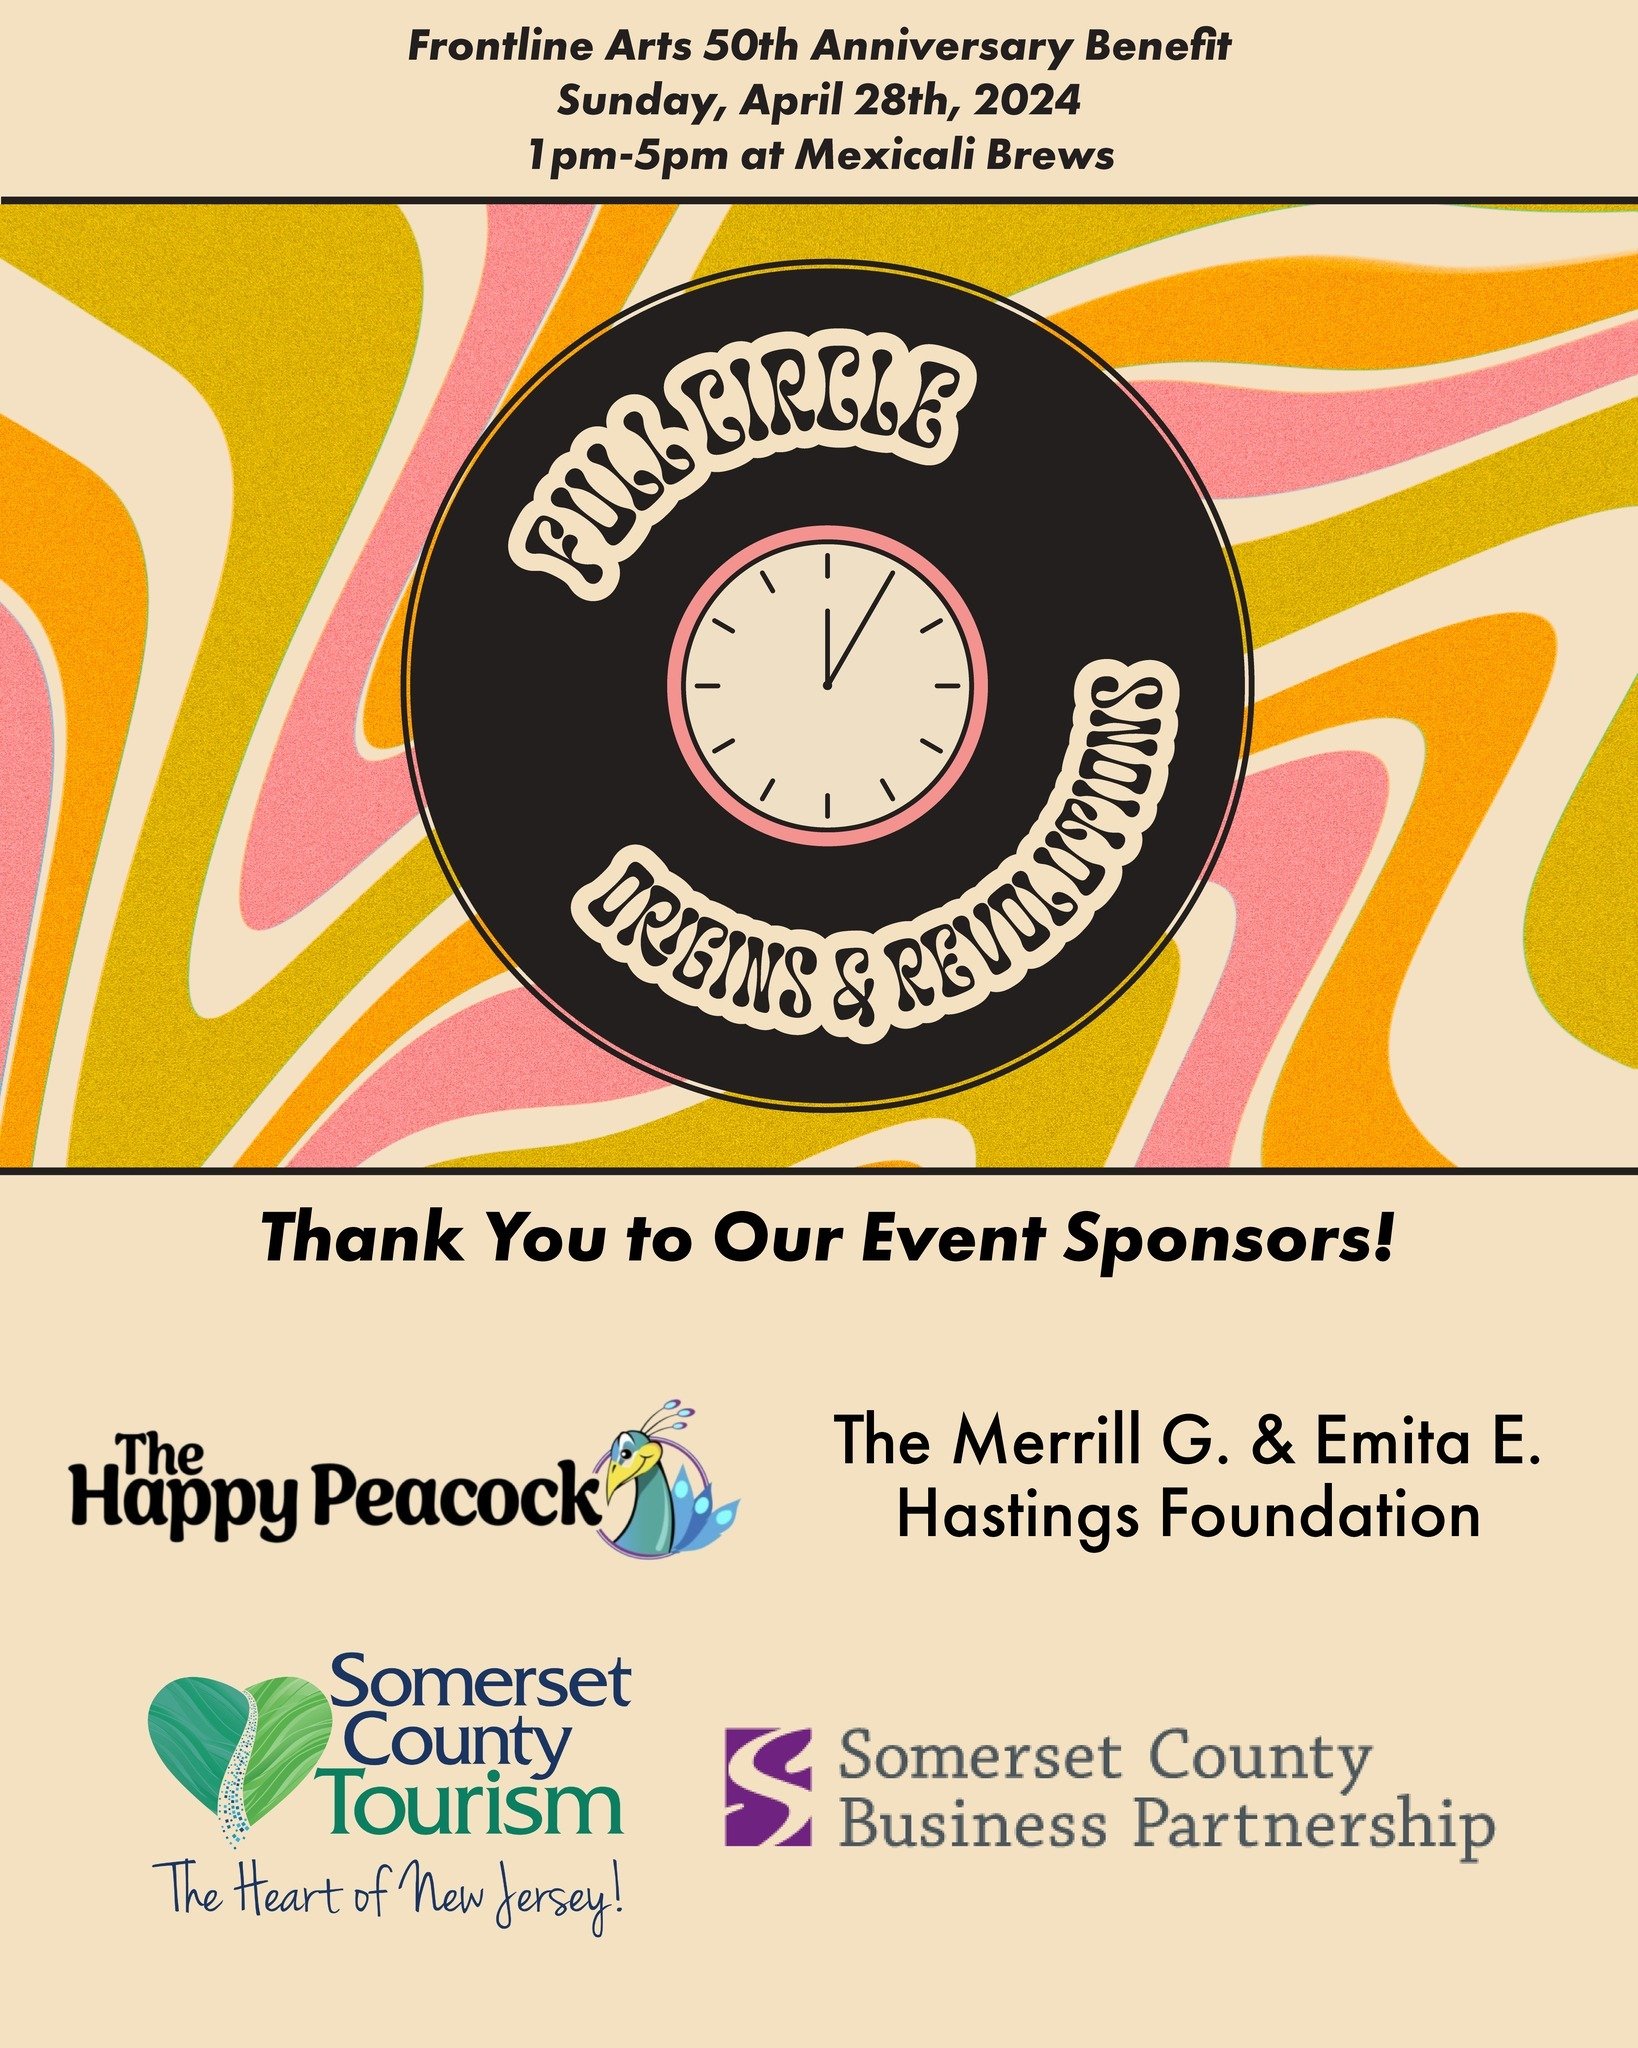 We&rsquo;d like to take a moment to thank the sponsors of our 50th Anniversary Benefit, Full Circle: Origins &amp; Revolutions!

Thank you to: 

The Happy Peacock @thehappypeacock23 
The Merrill G. &amp; Emita E. Hastings Foundation
The Somerset Coun